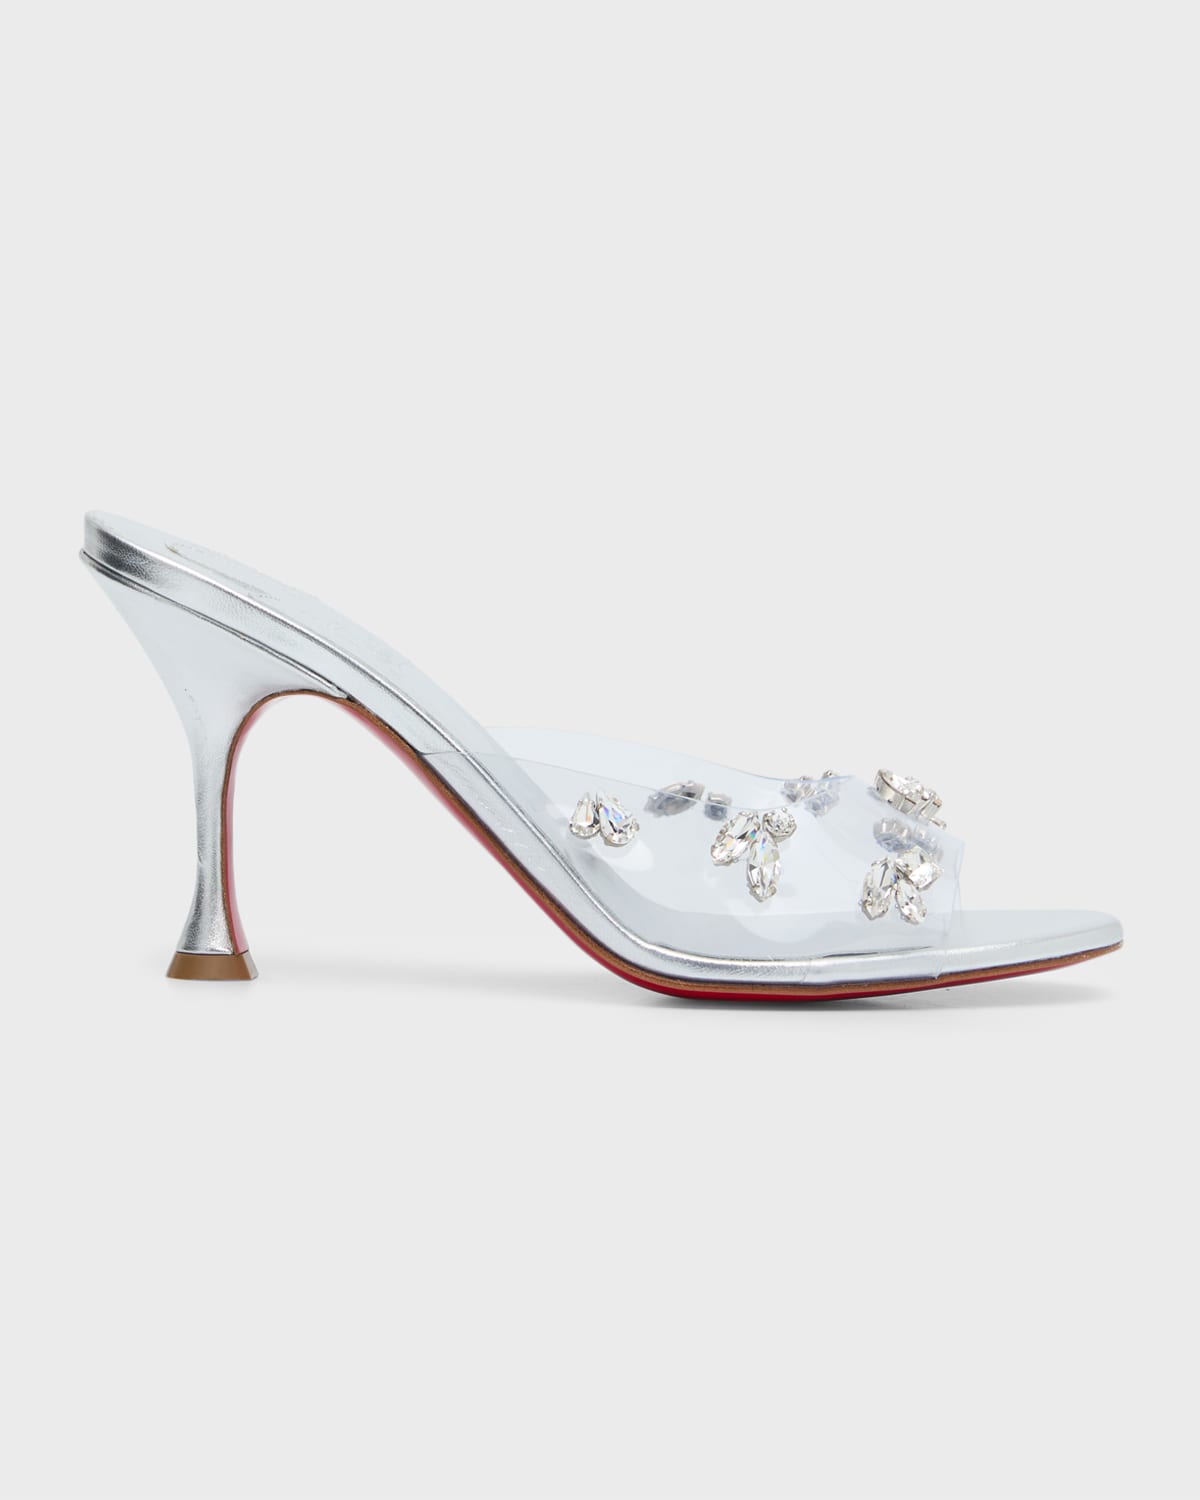 CHRISTIAN LOUBOUTIN DEGRAQUEEN CRYSTAL TRANSPARENT RED SOLE MULE SANDALS